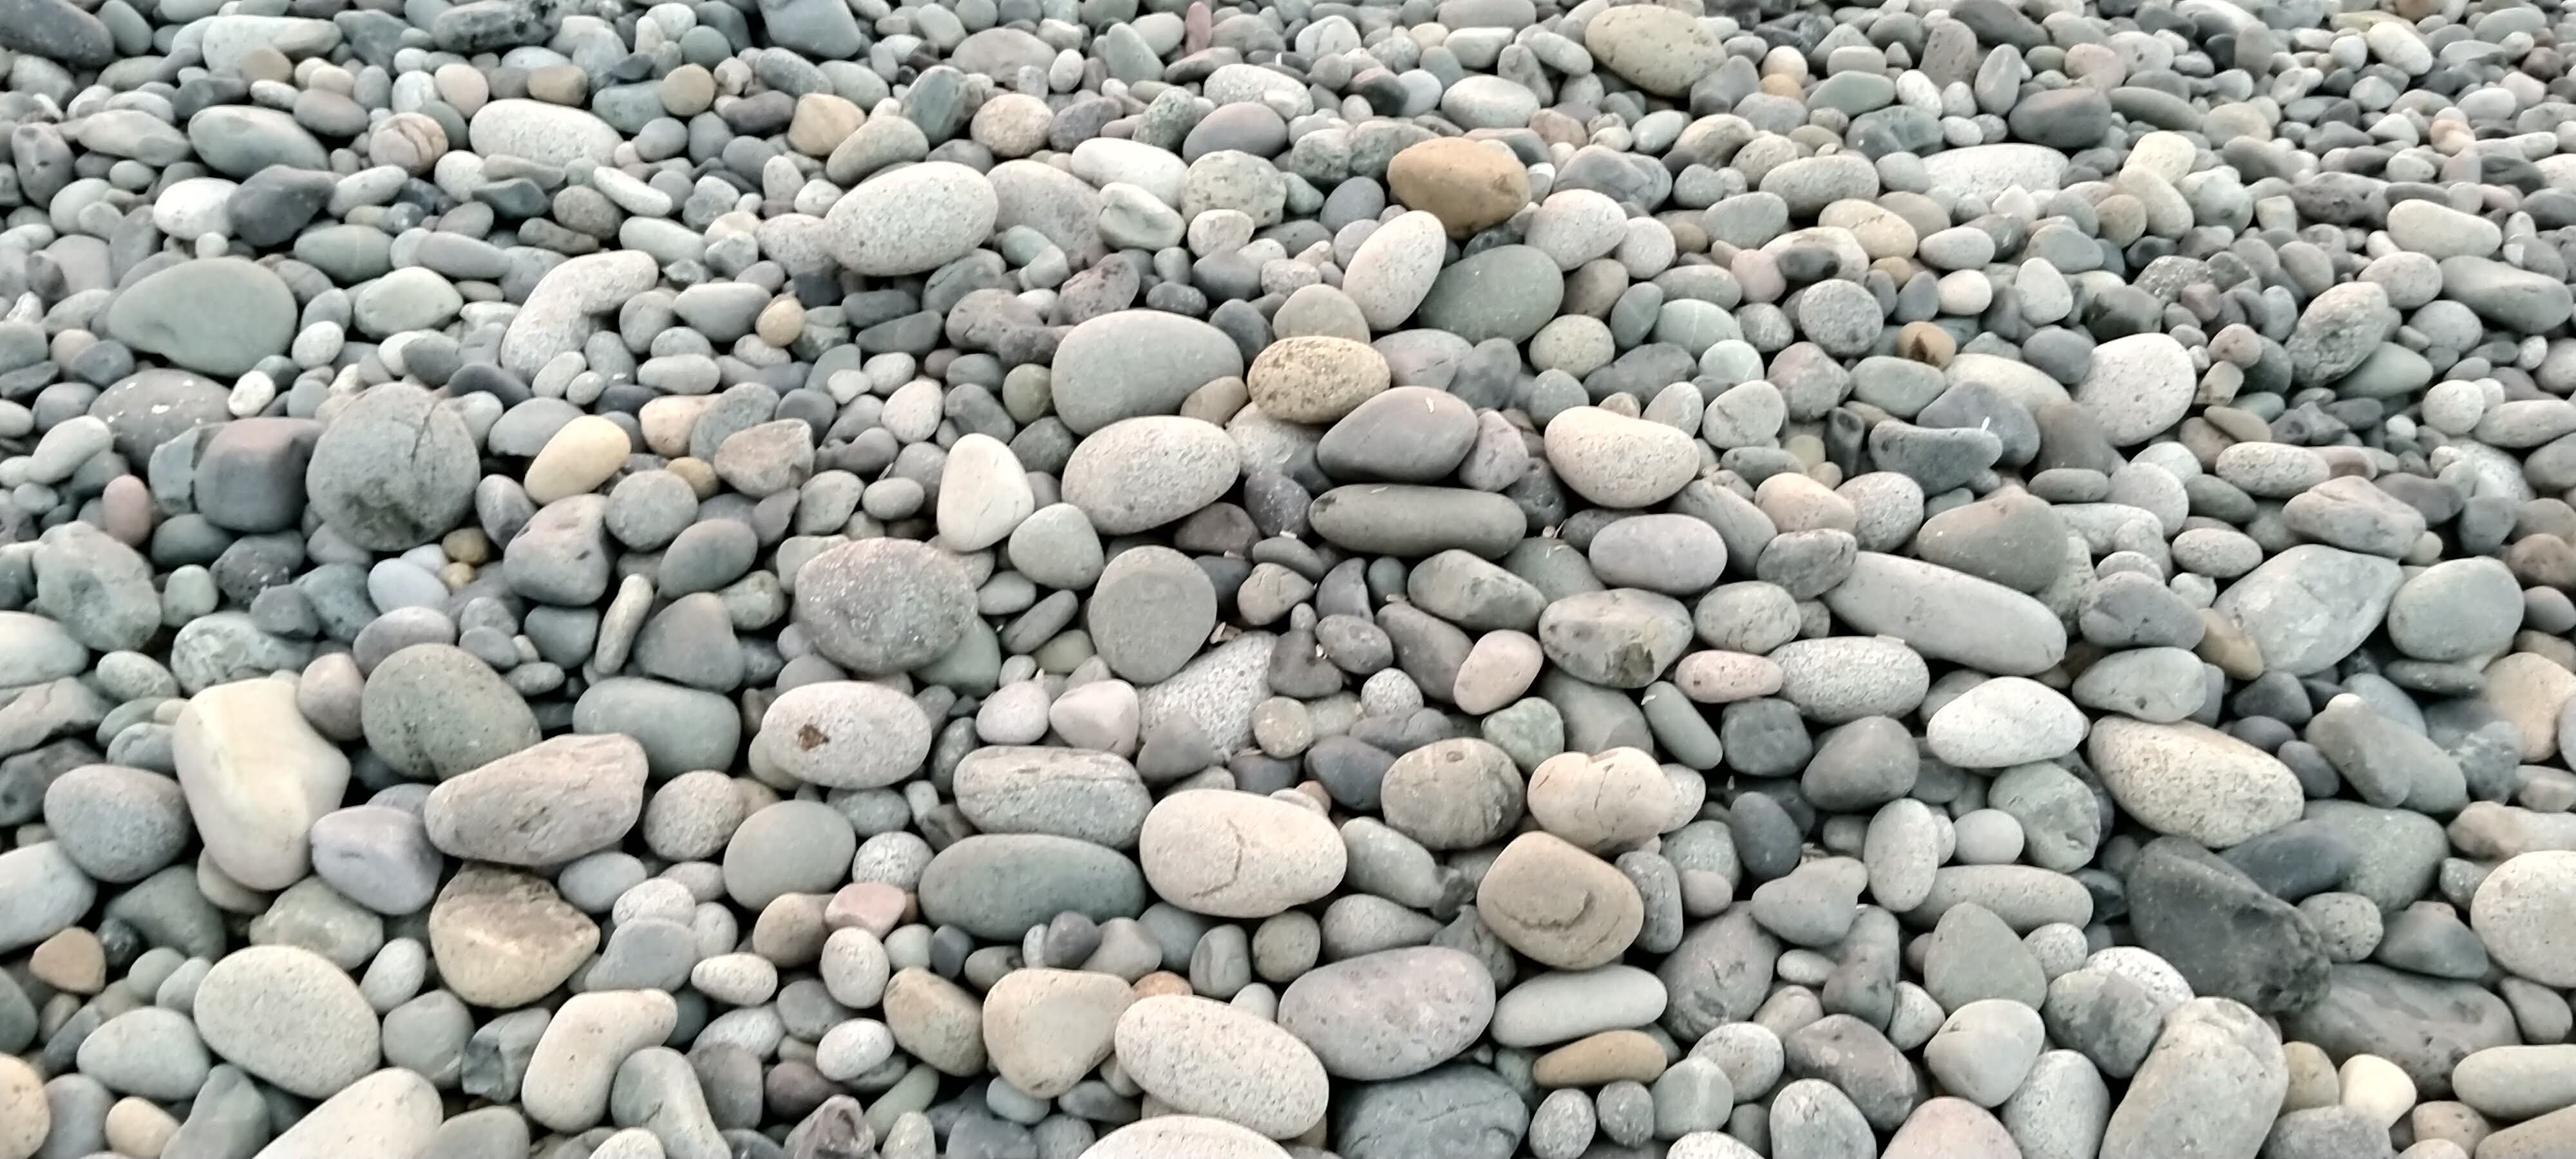 The beach is covered in rocks as far as the eyes can see, and even further